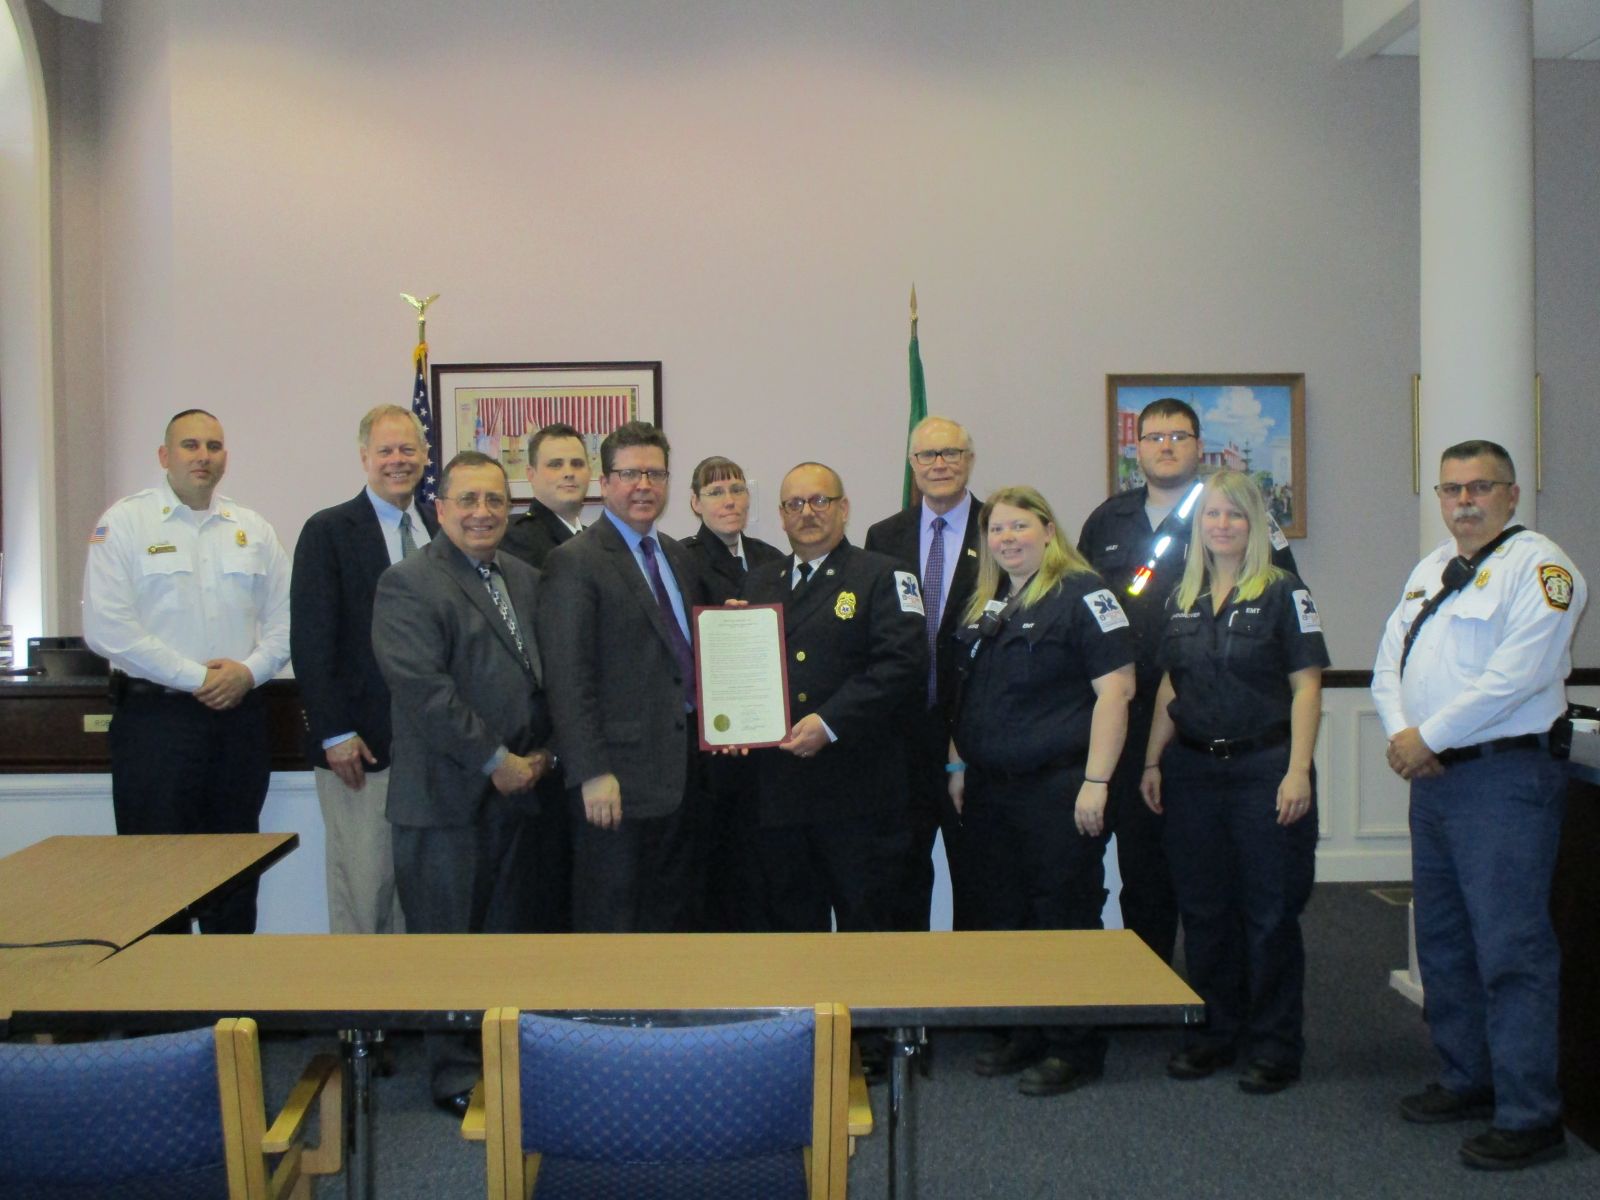 County Commisionsers and EMS Employees